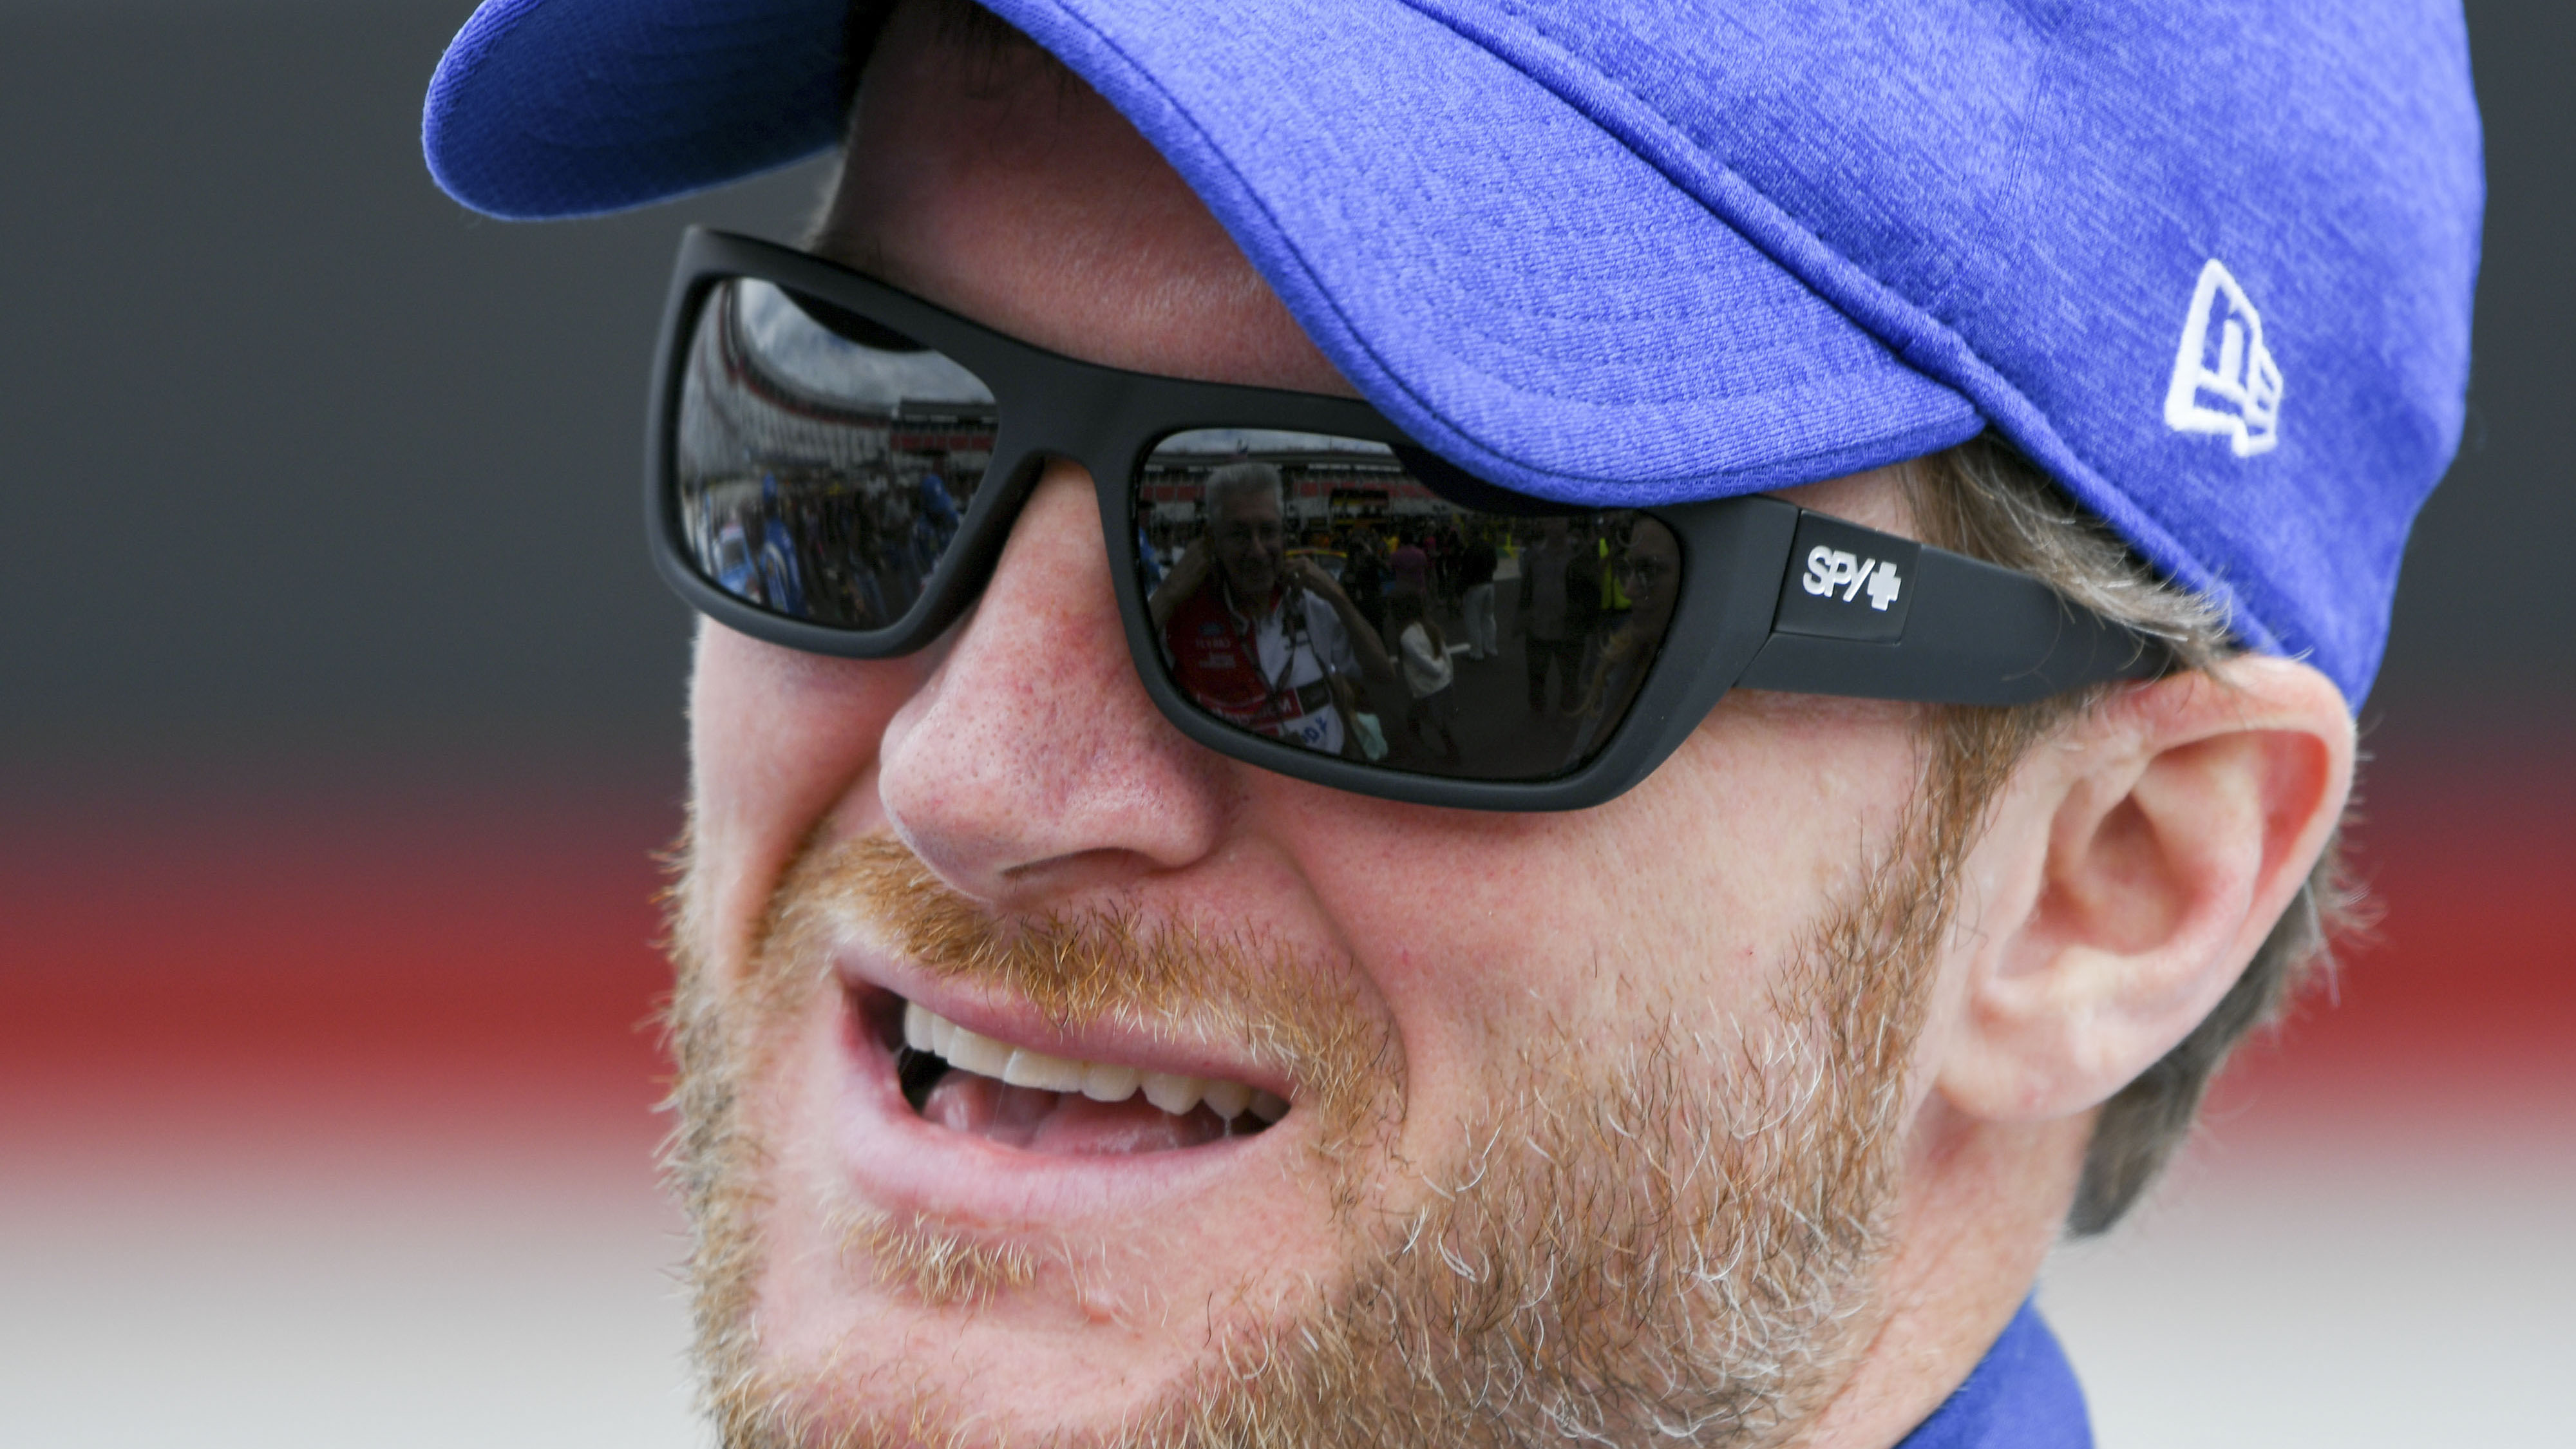 Apr 24, 2017; Bristol, TN, USA; Monster Energy NASCAR Cup Series driver Dale Earnhardt Jr. before the start of the Food City 500 at Bristol Motor Speedway. Mandatory Credit: Randy Sartin-USA TODAY Sports